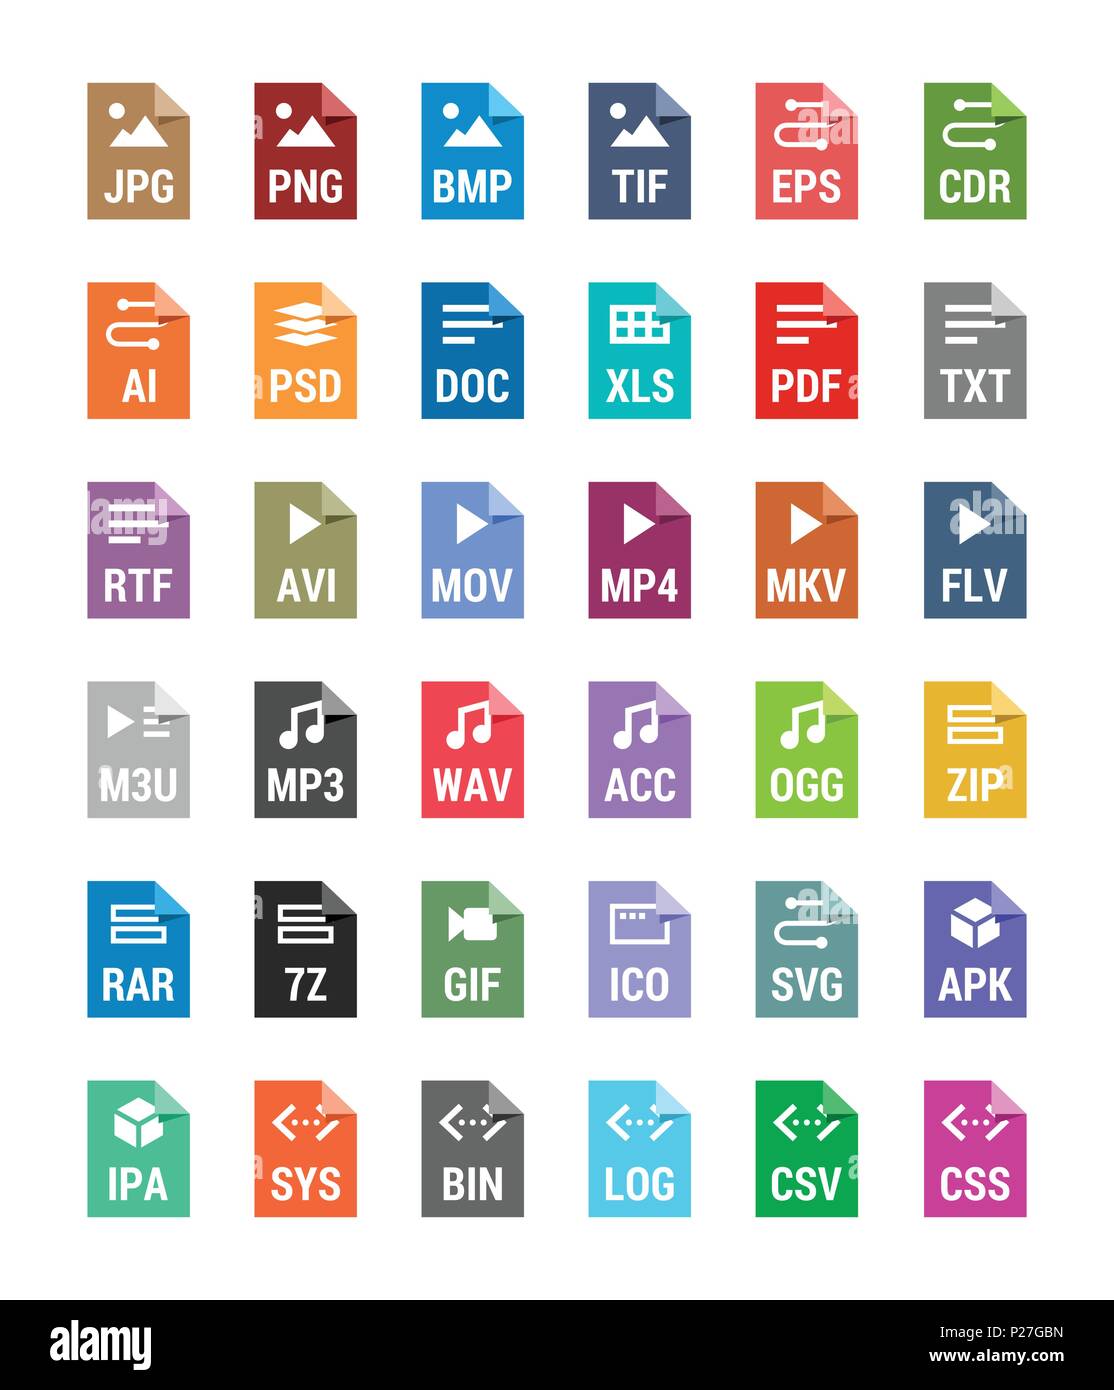 Flat file types icons. Archive, vector, audio, image, system, document formats Stock Vector